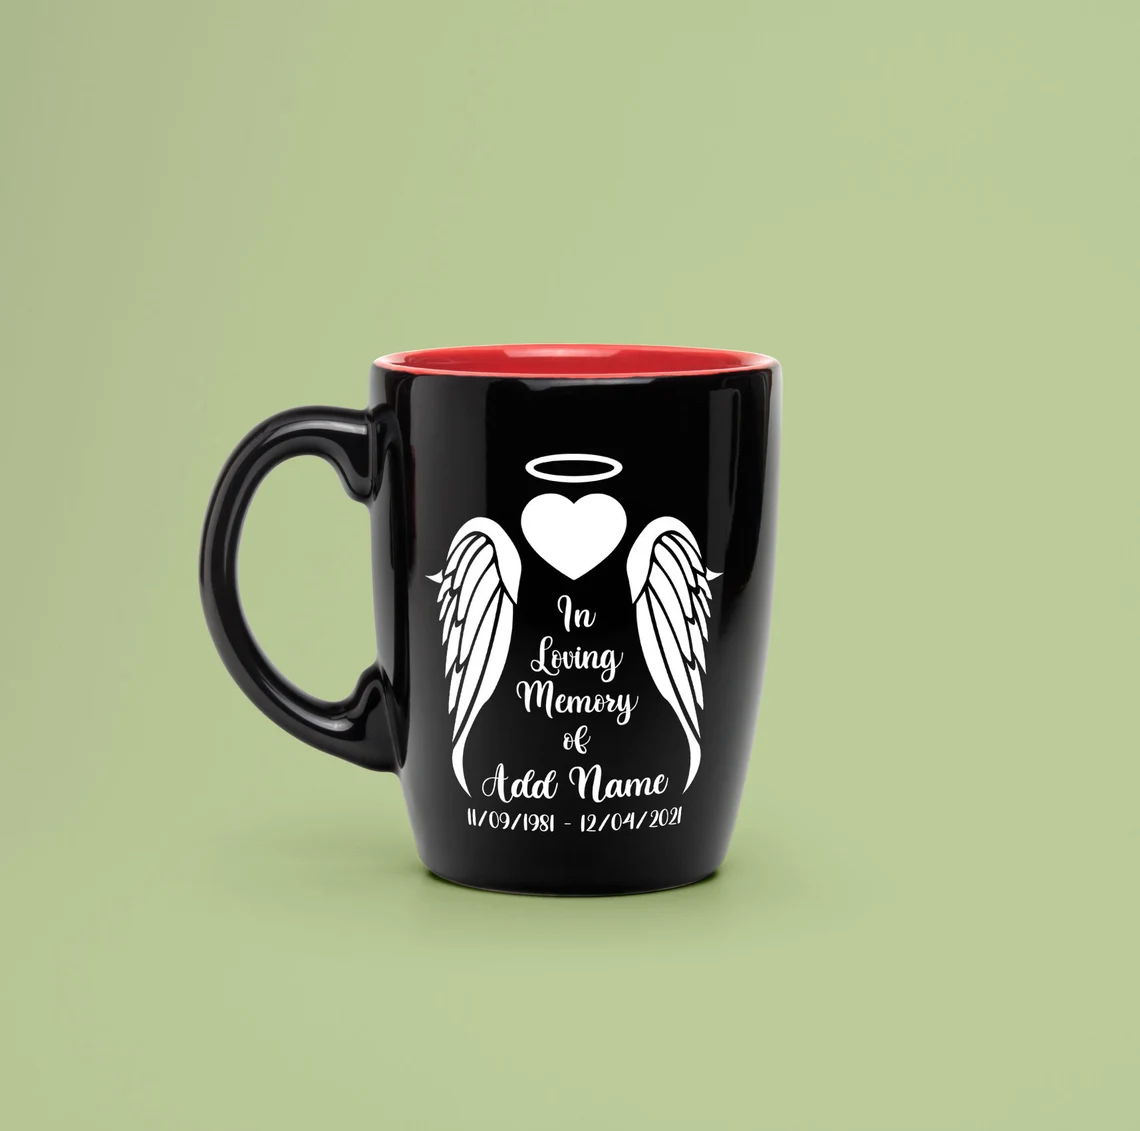 A print of angel wings on a black cup.